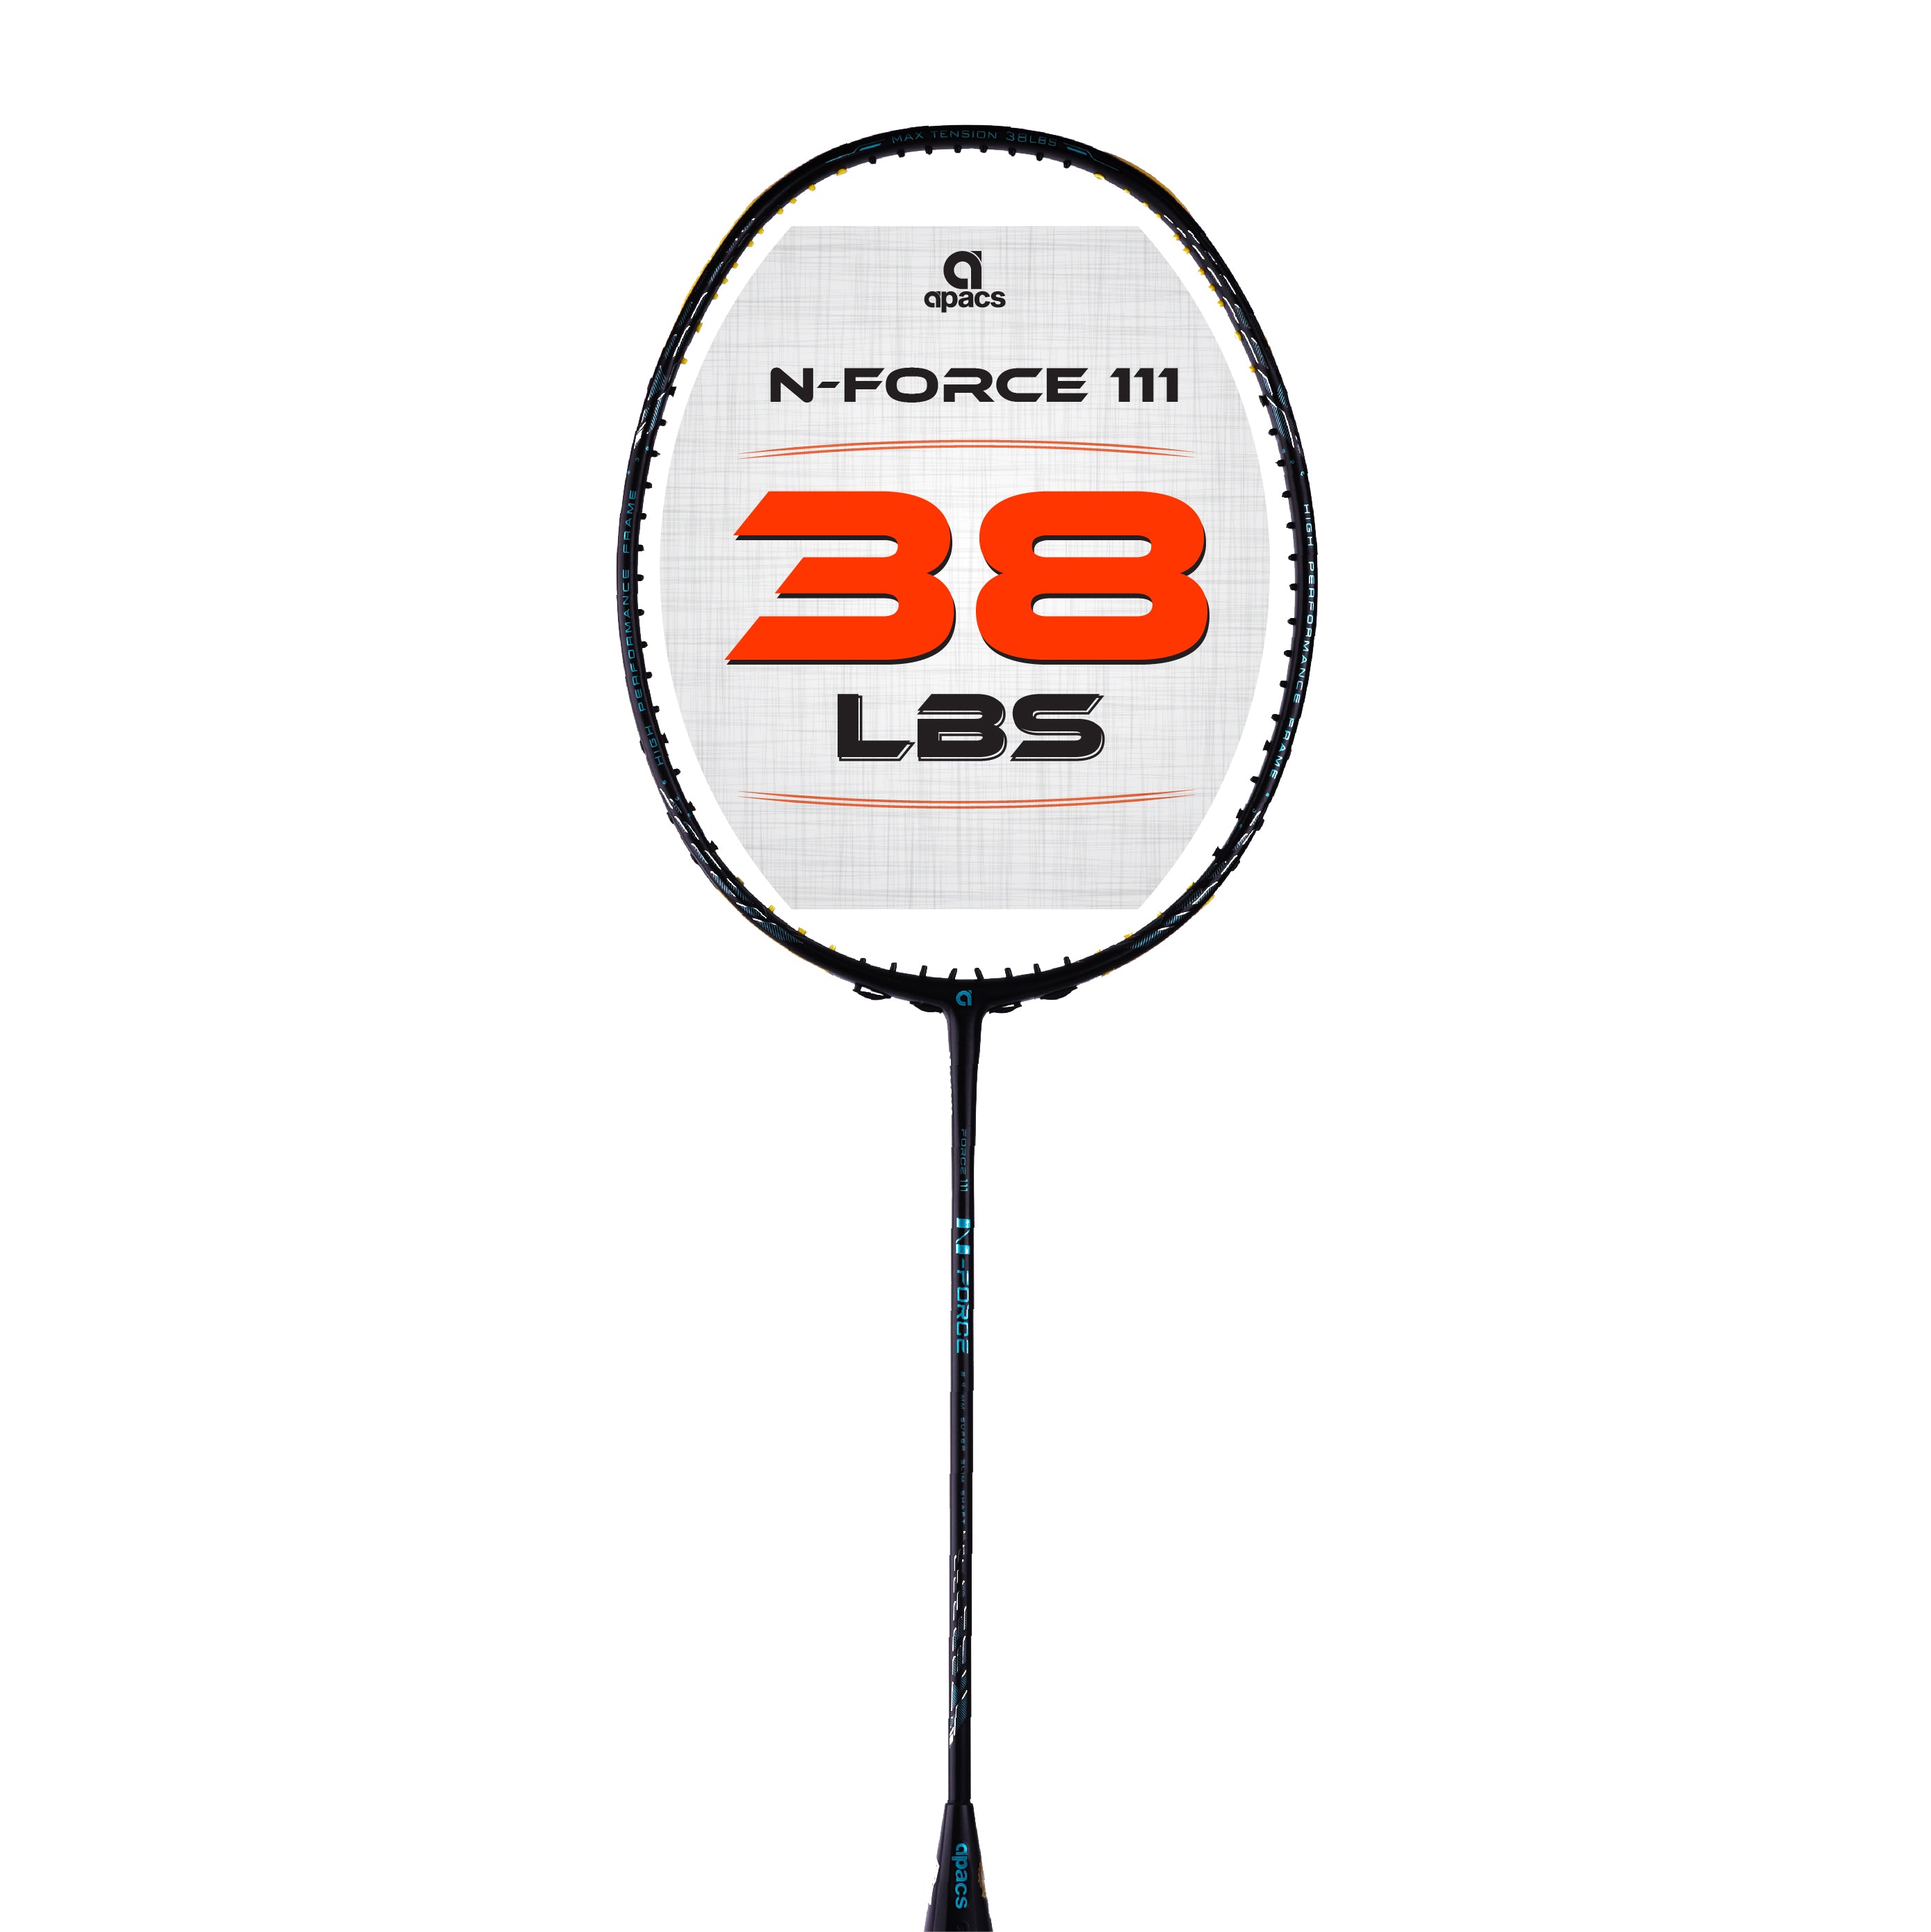 Apacs N-Force 111 - Pro-Grade Badminton Racquets with Full Cover